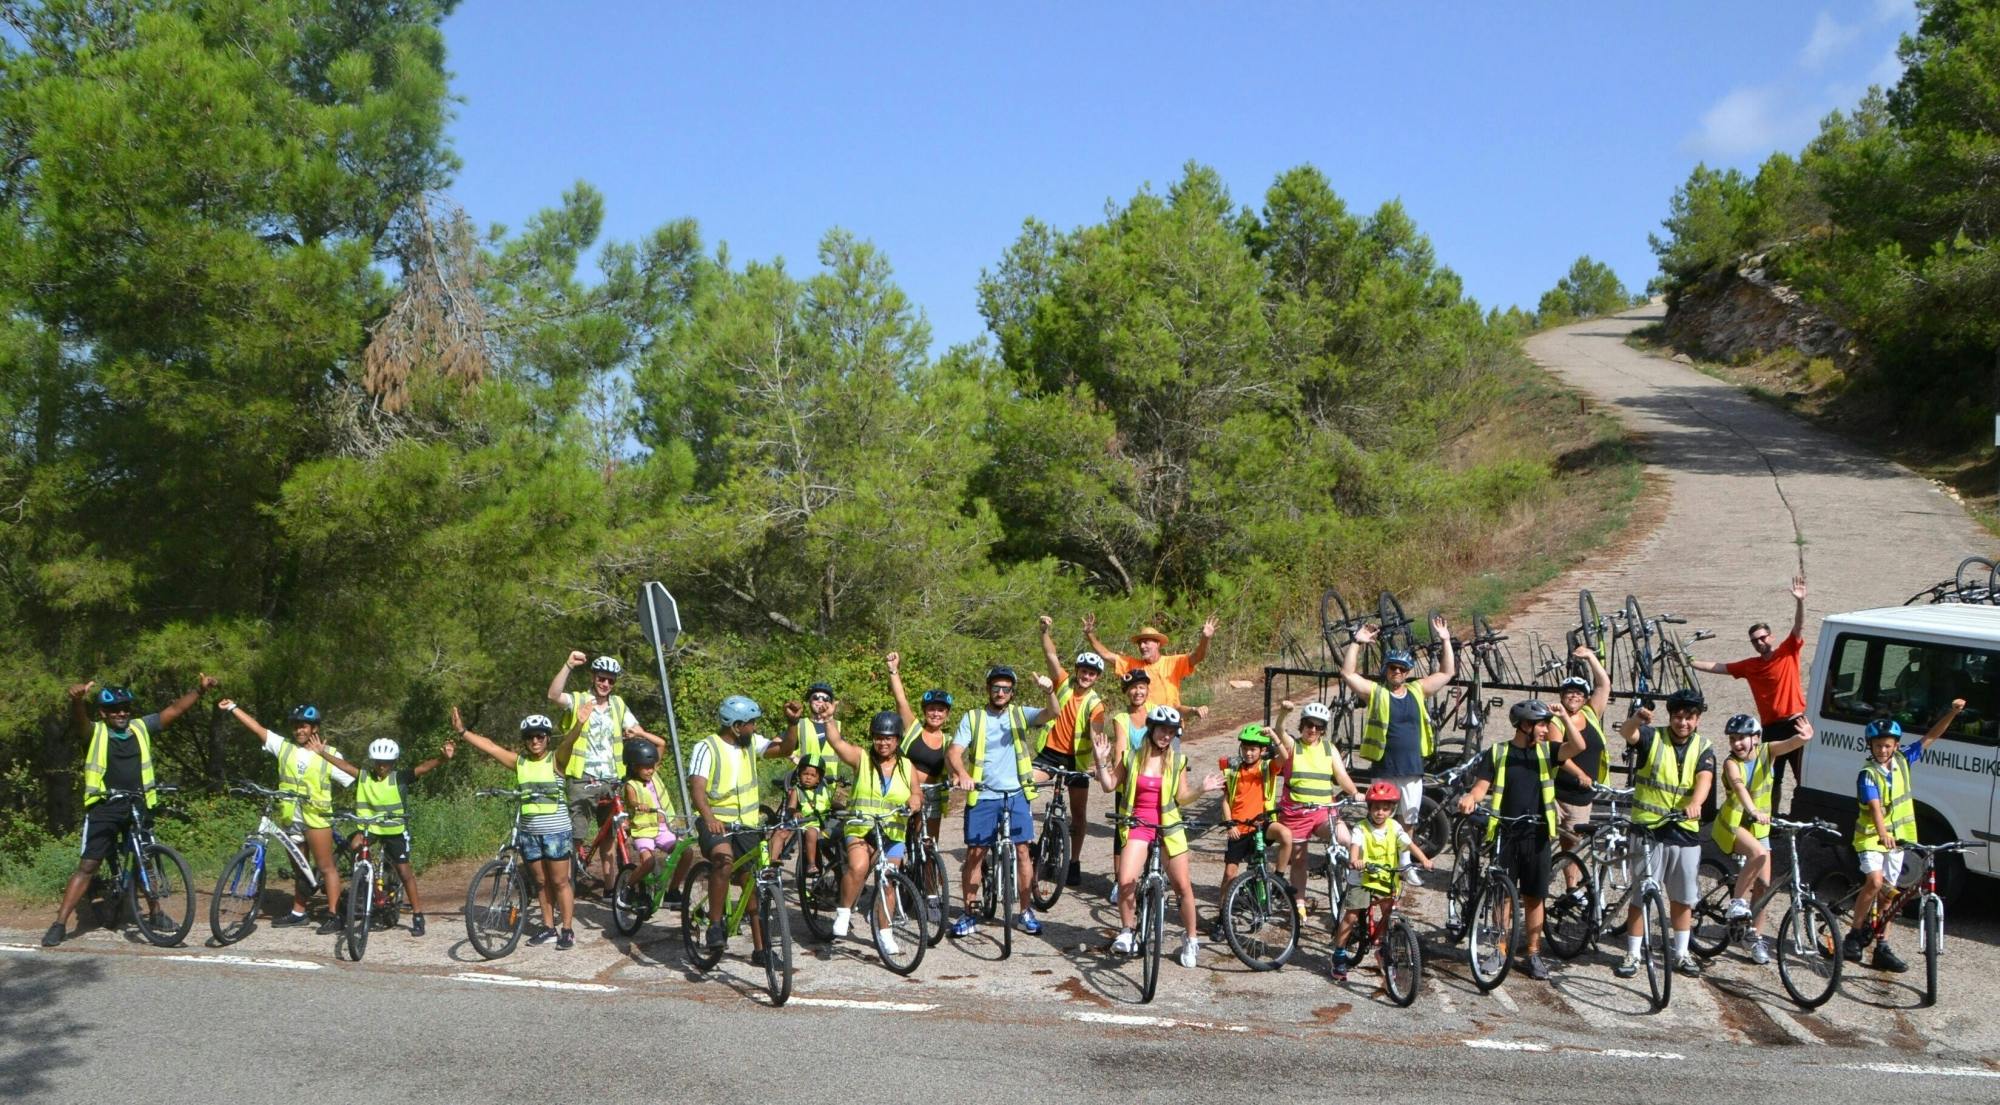 Costa Dorada Cycling Tour with Olive Oil Museum